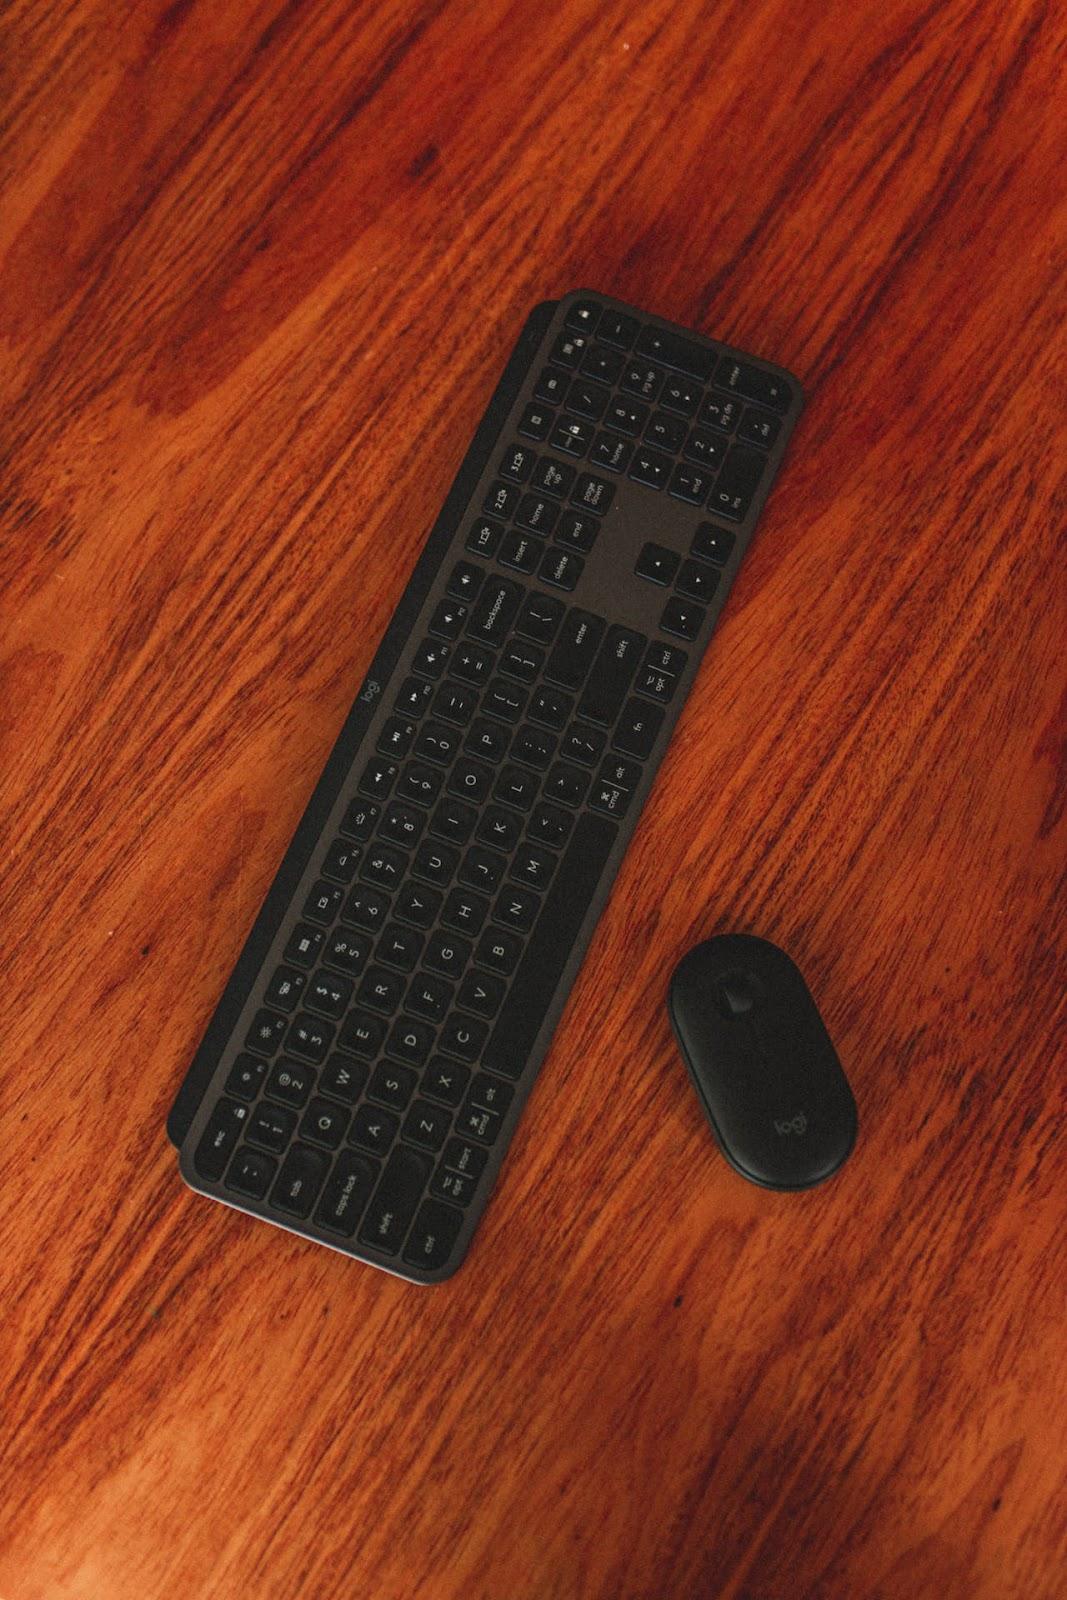 Wireless Keyboard + Mouse Combo: christmas gift ideas for the remote and WFH peeps